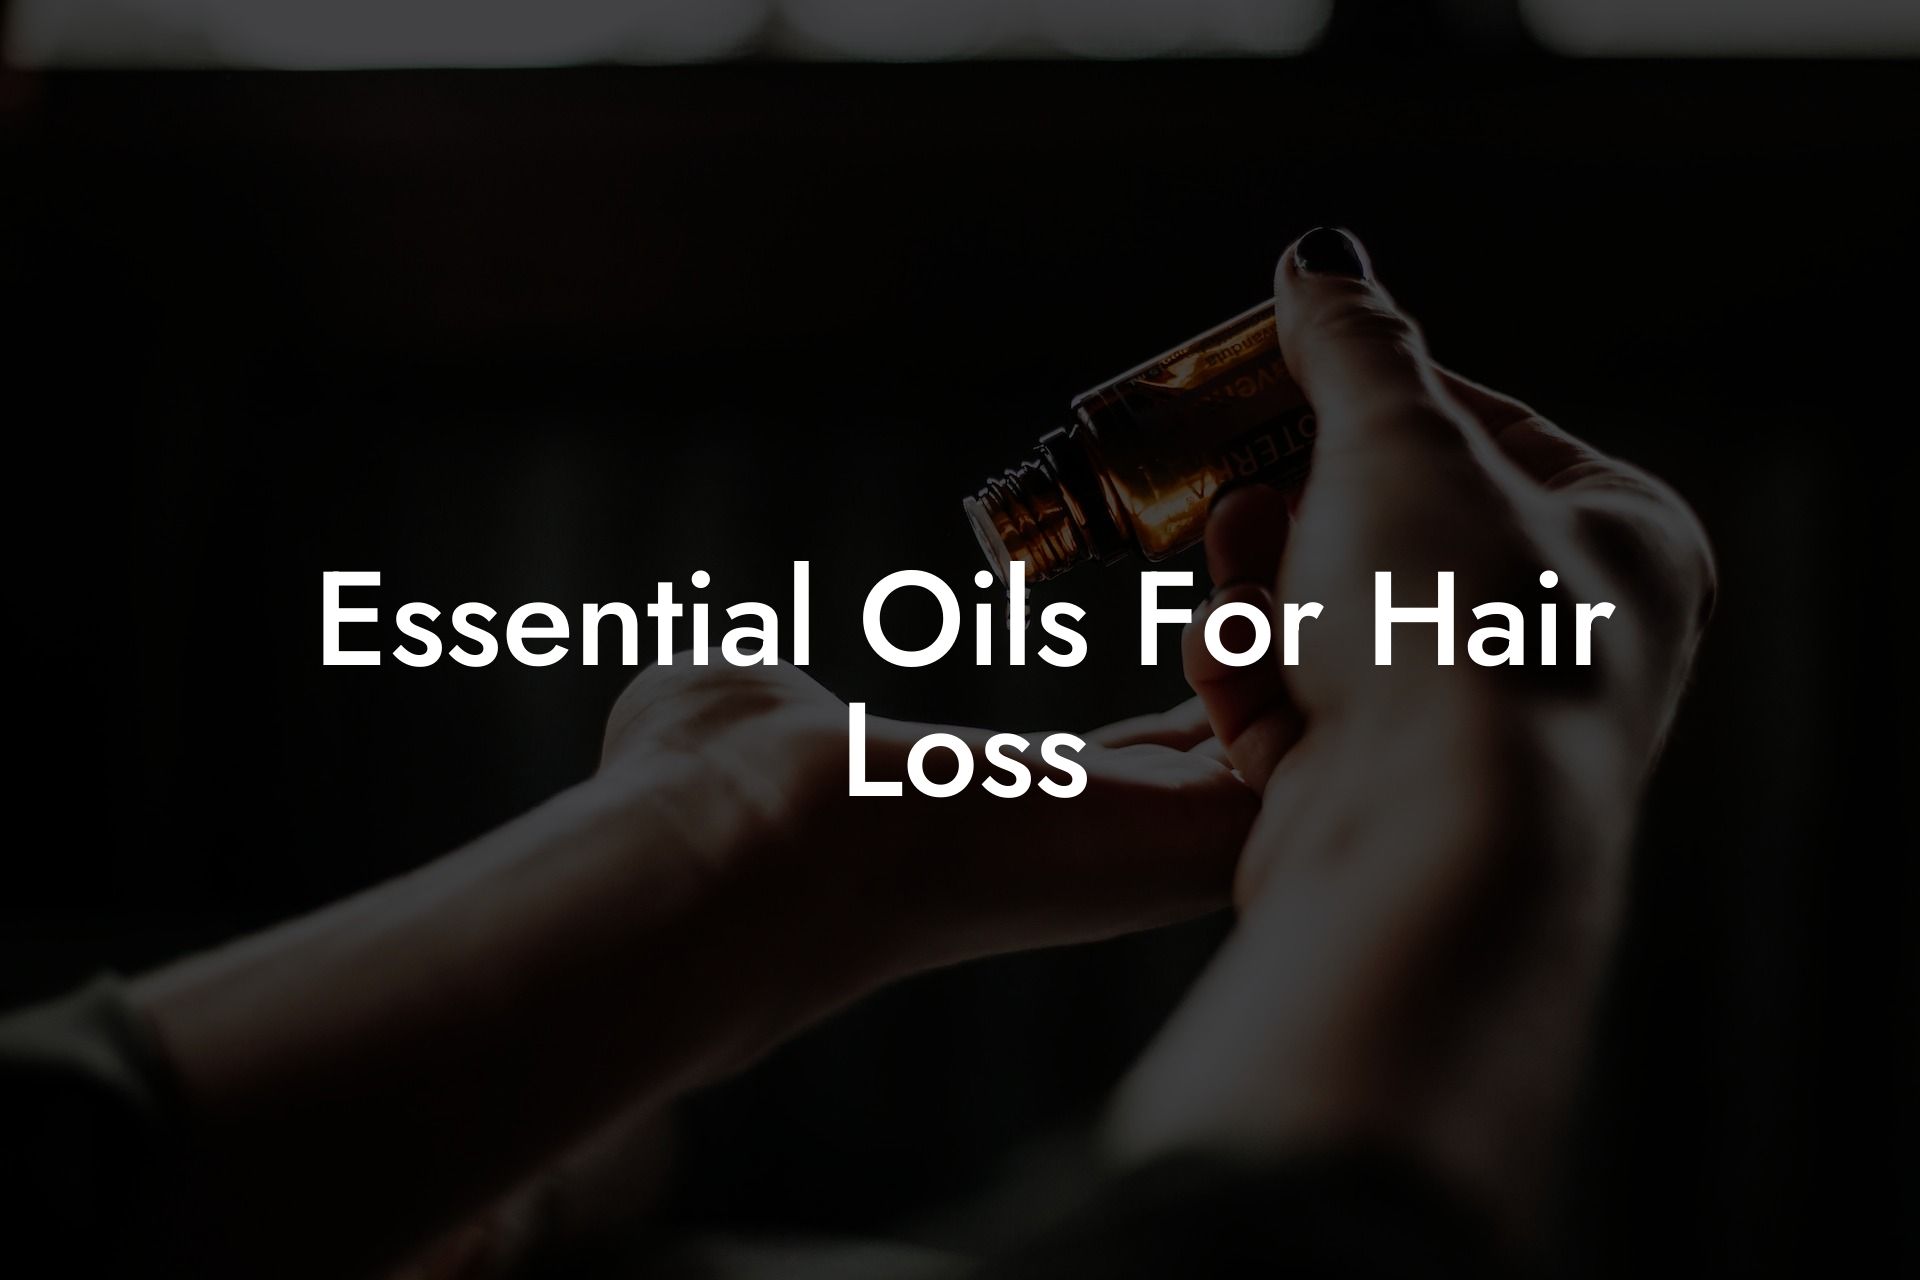 Essential Oils For Hair Loss